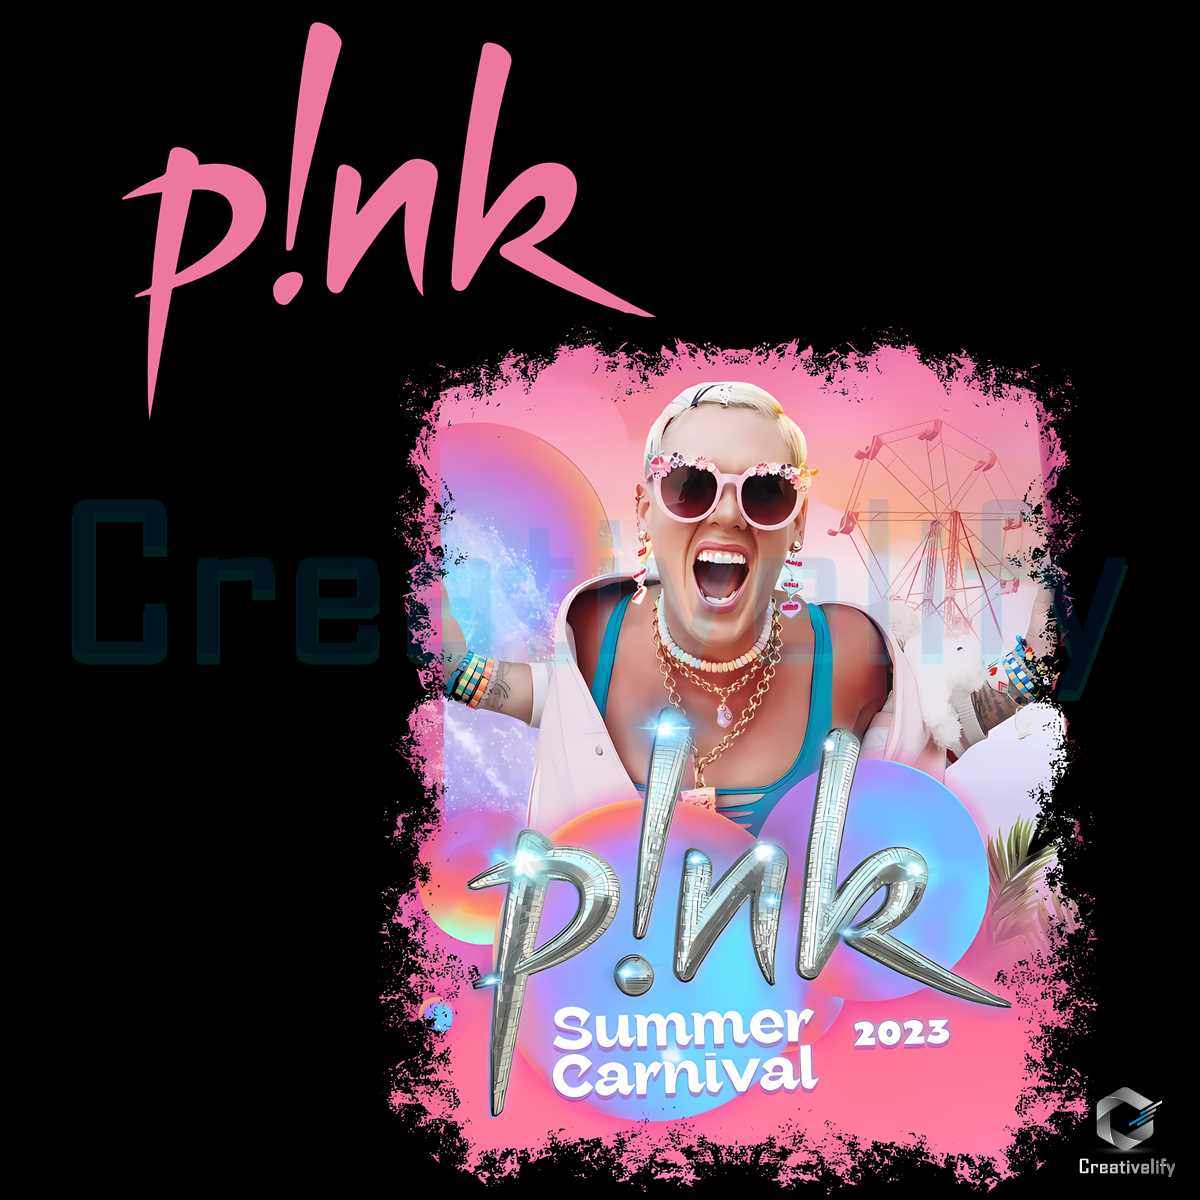 Free Pink Summer Carnival 2023 PNG Free download today